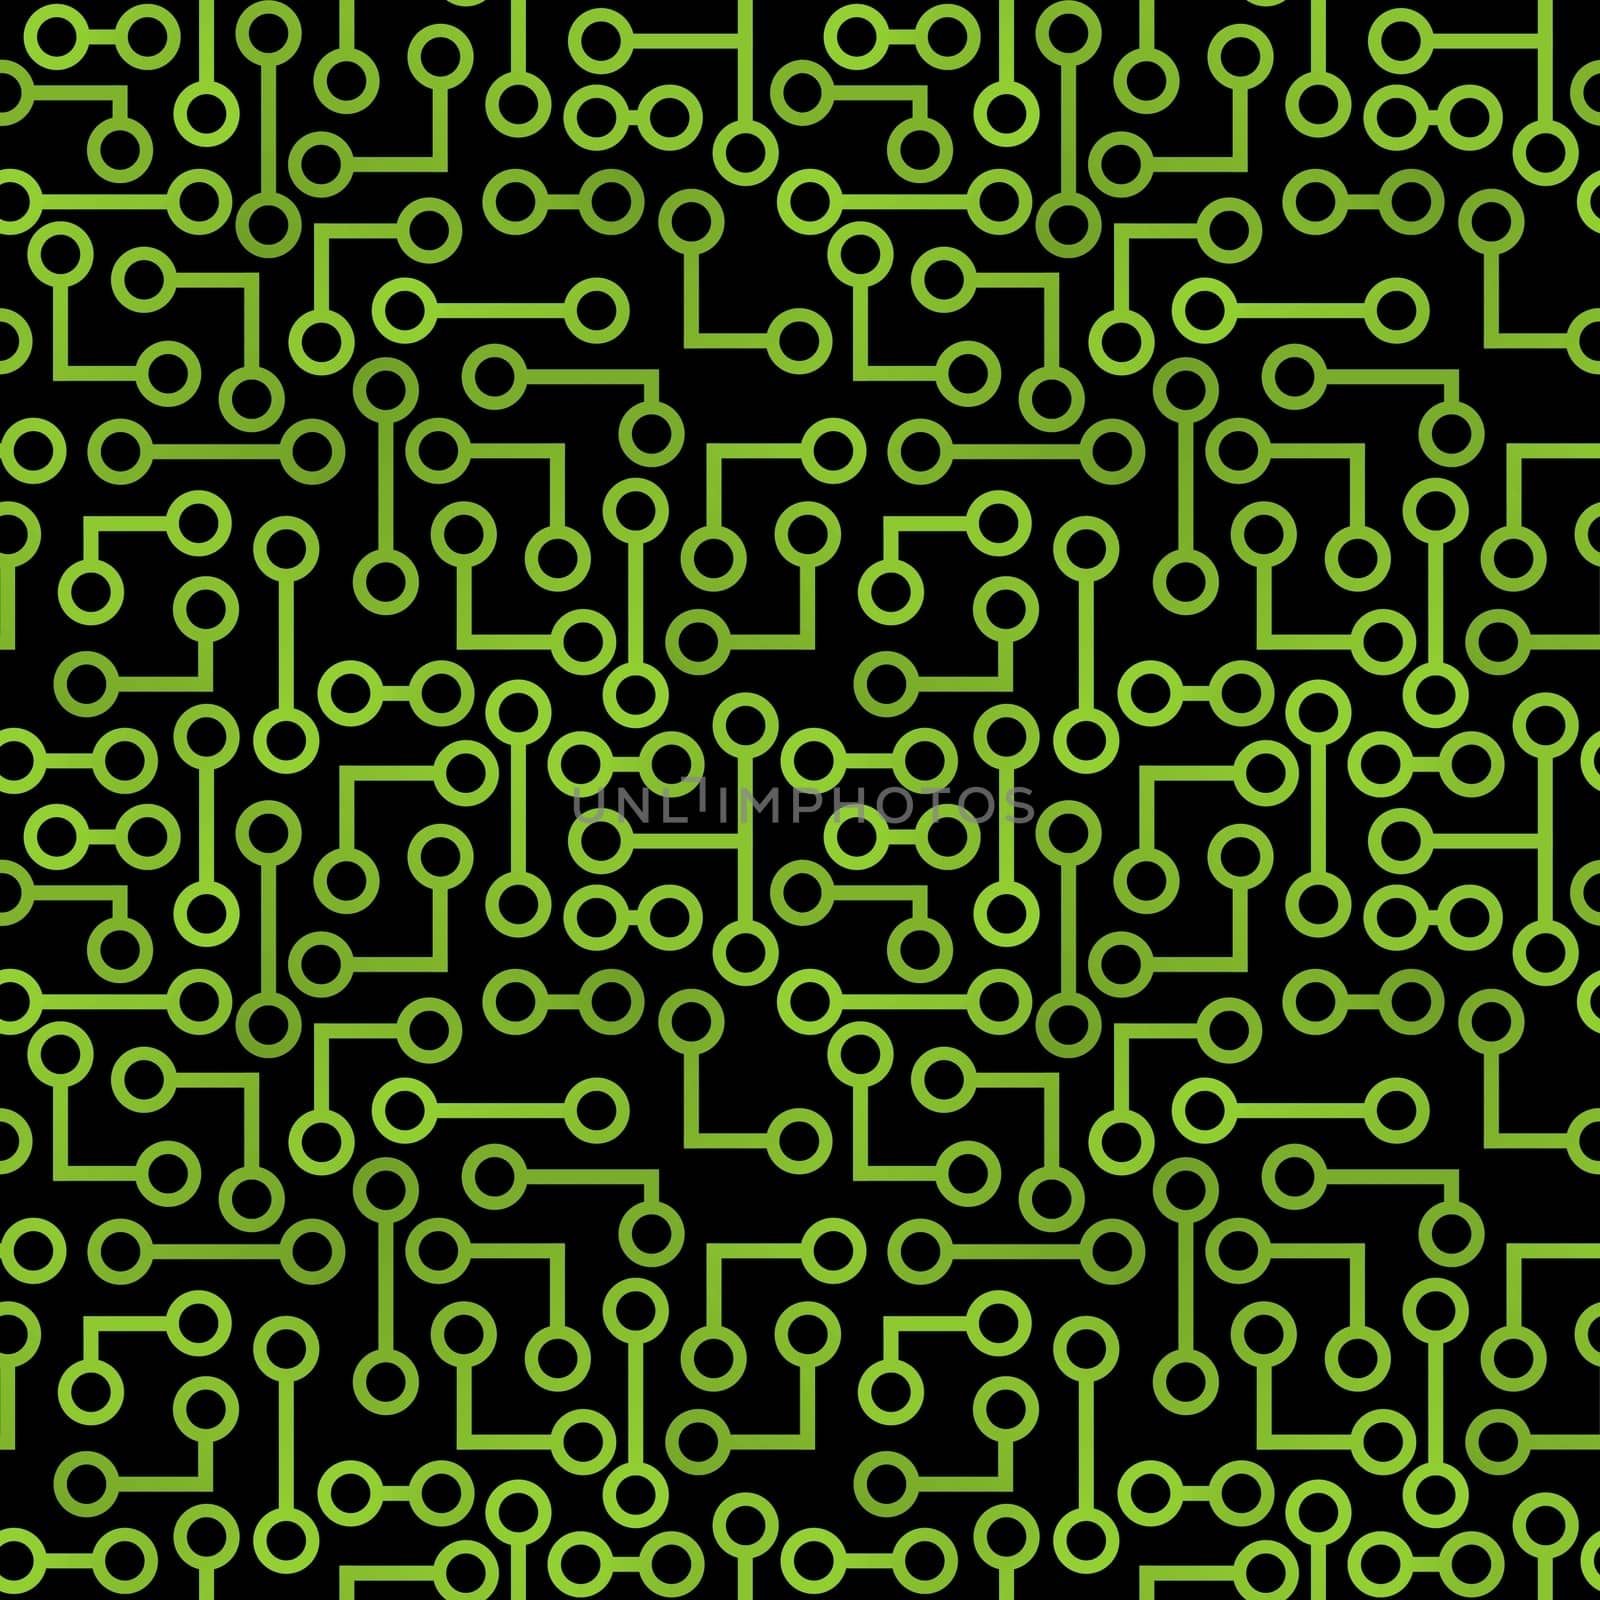 Illustrated Green and Black Electronic Circuit Background